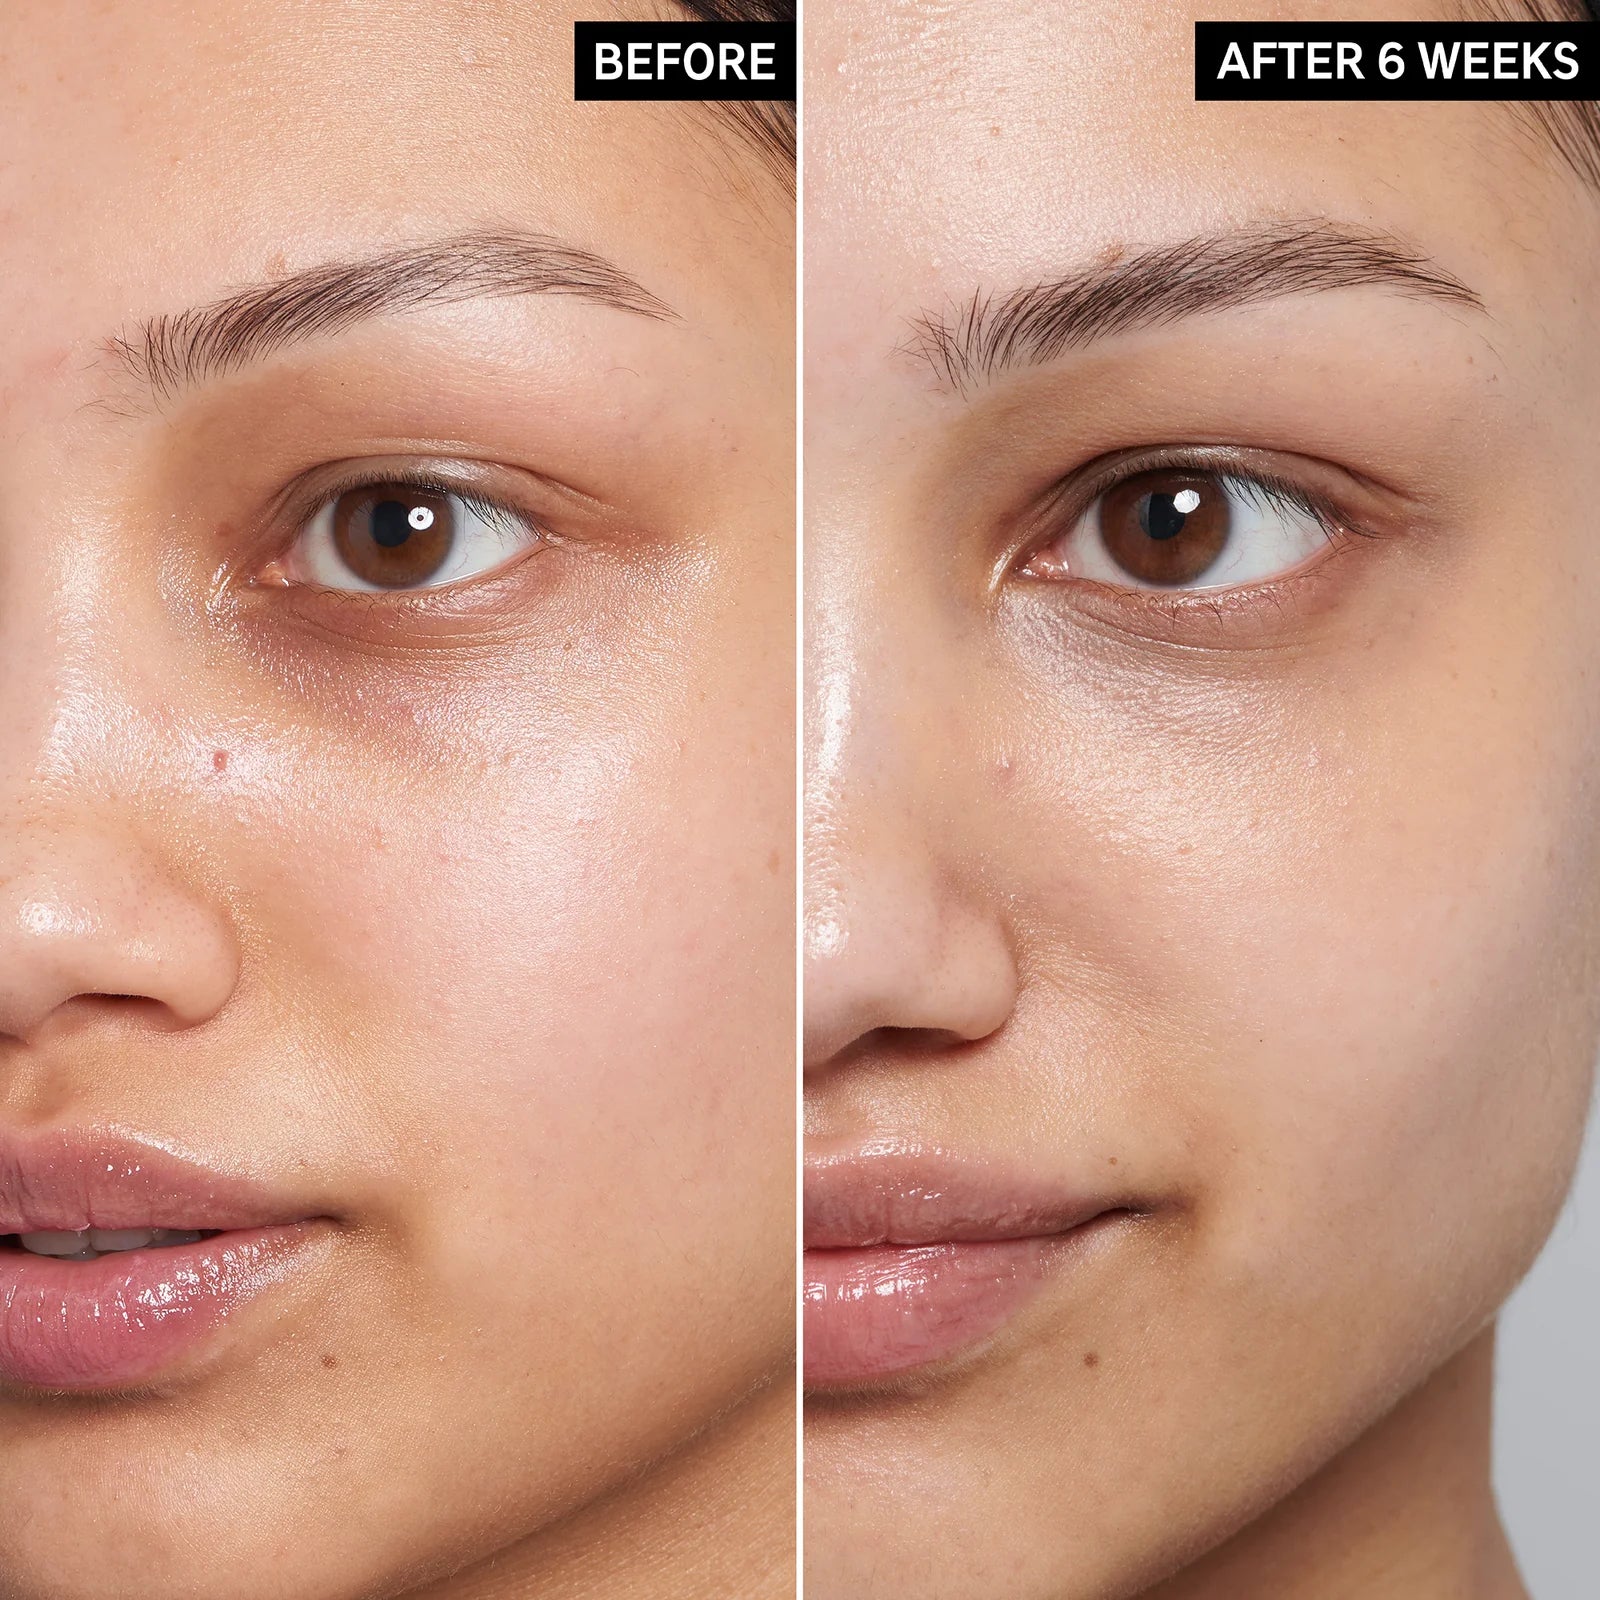 image showing before and after of using caffeine solution for eye dark circles available at Heygirl.pk for delivery in Pakistan